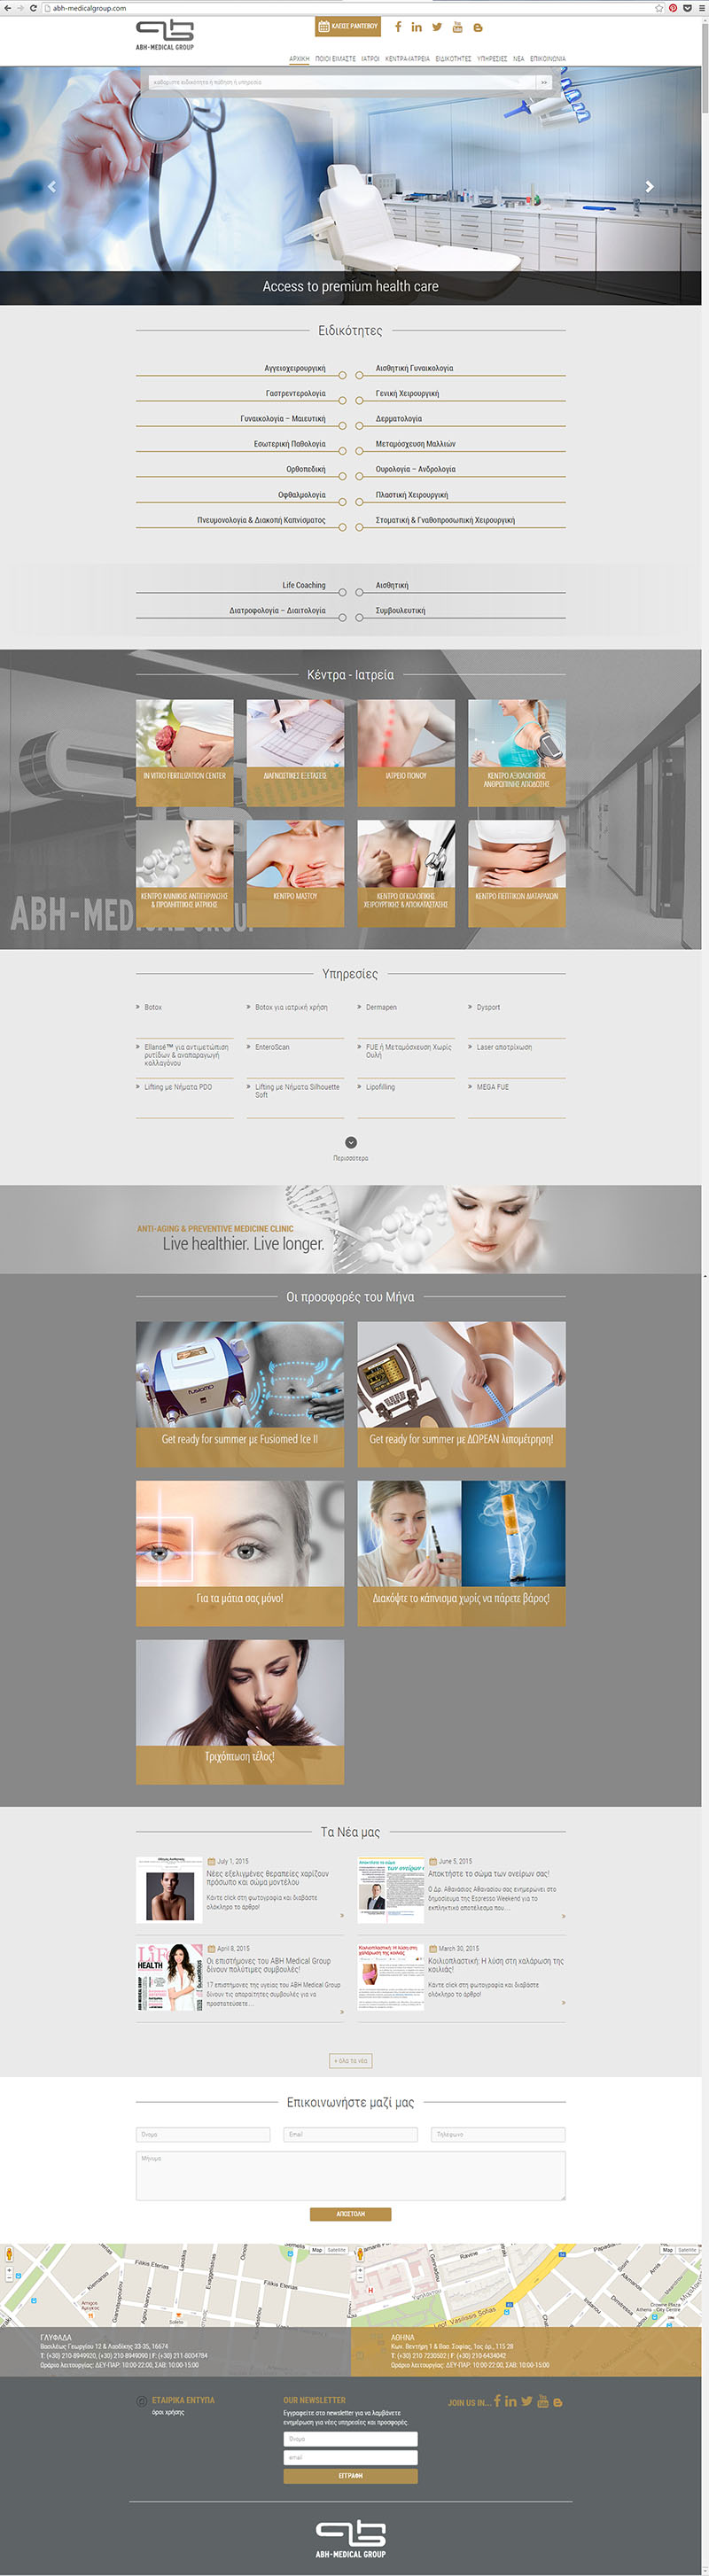 ABH Medical Group frontpage